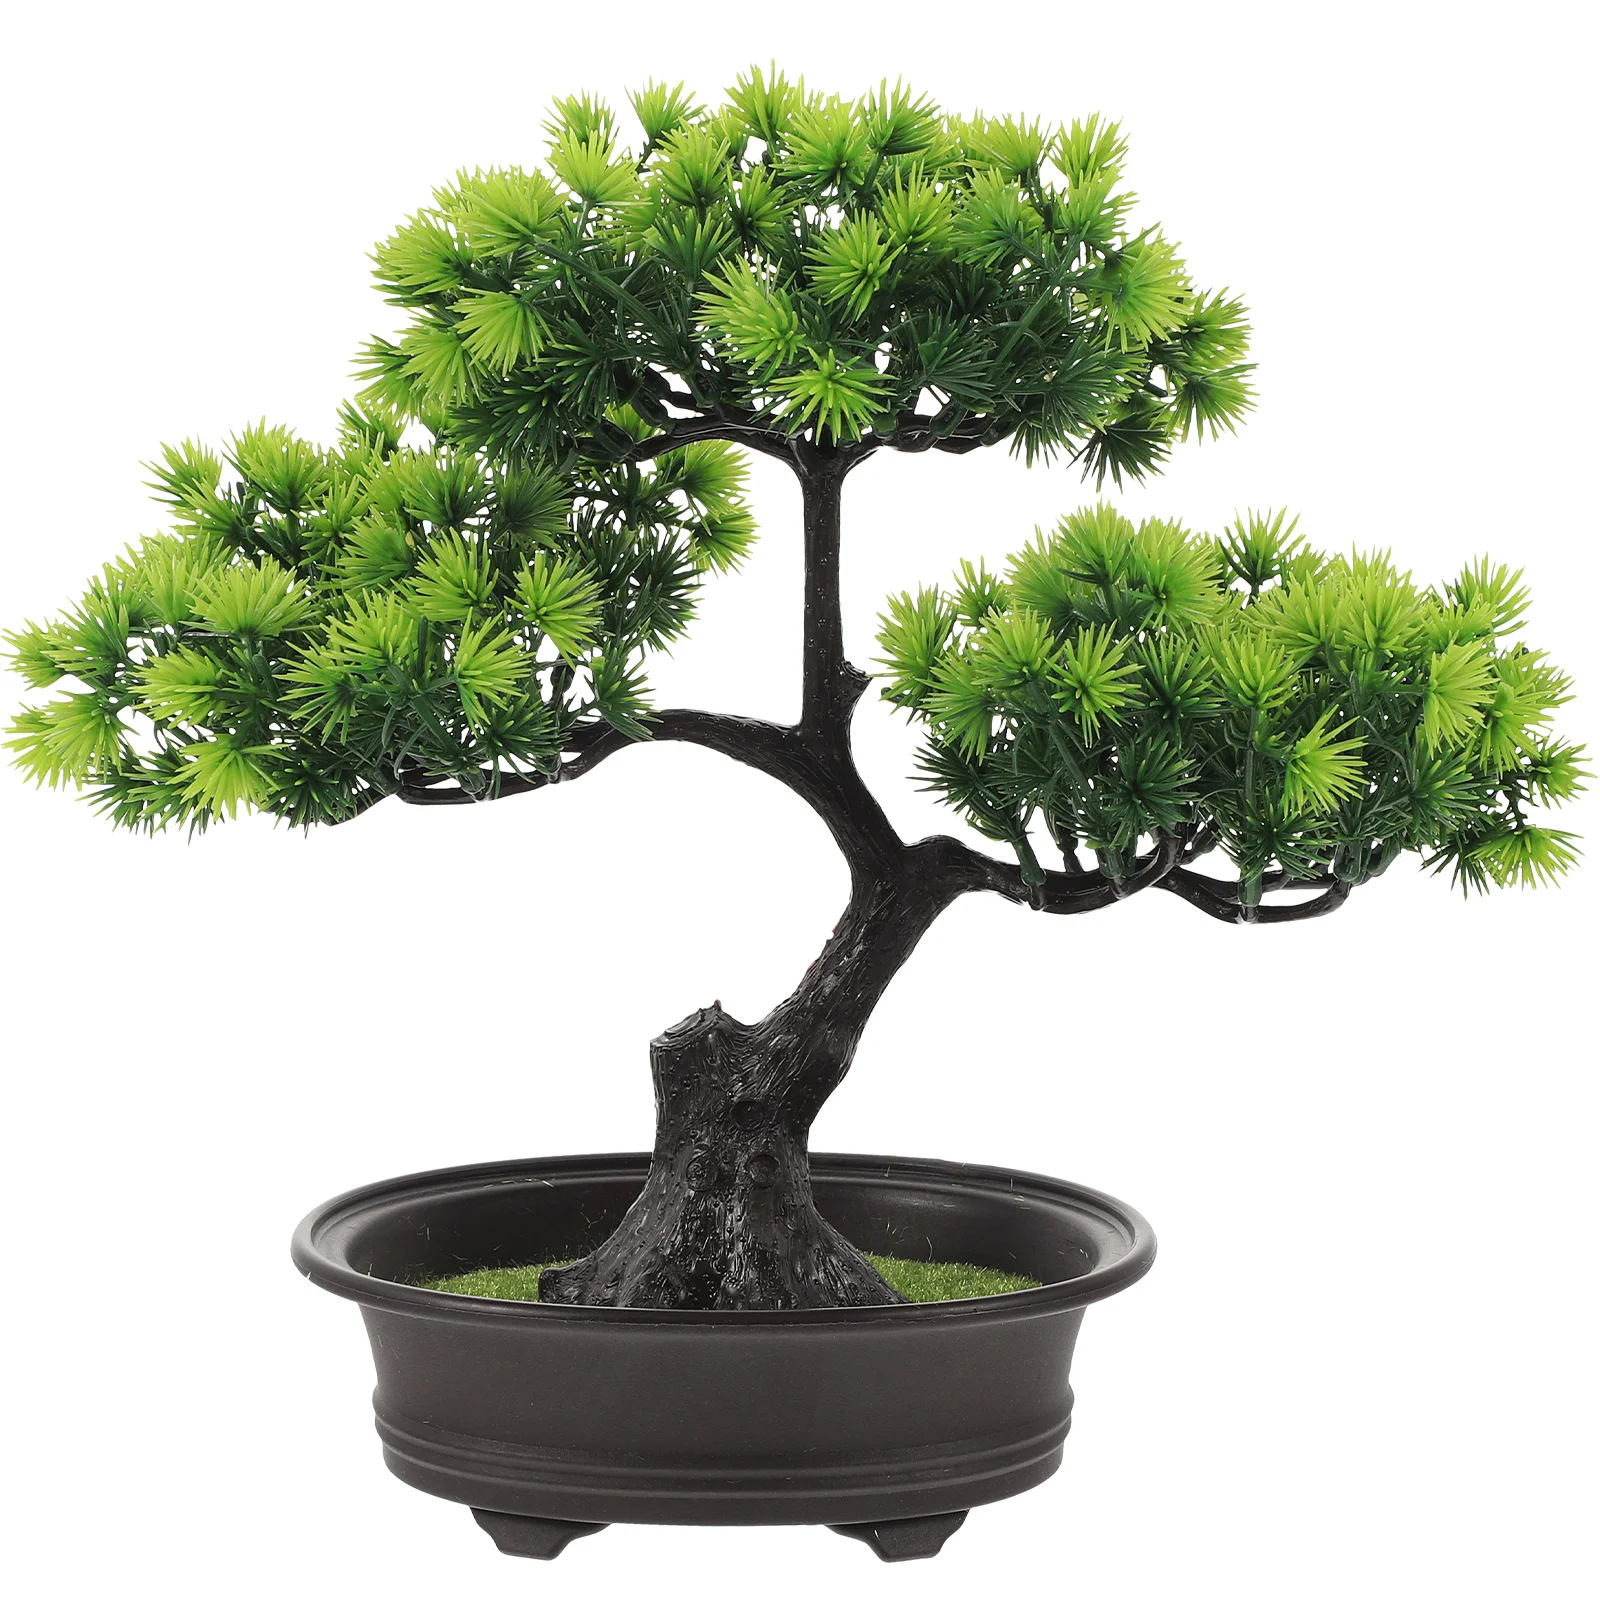 

Welcome Pine Flower Potted Plant Artificial Ornaments Home Fake Bonsai Decor Plastic Faux Plants Indoor